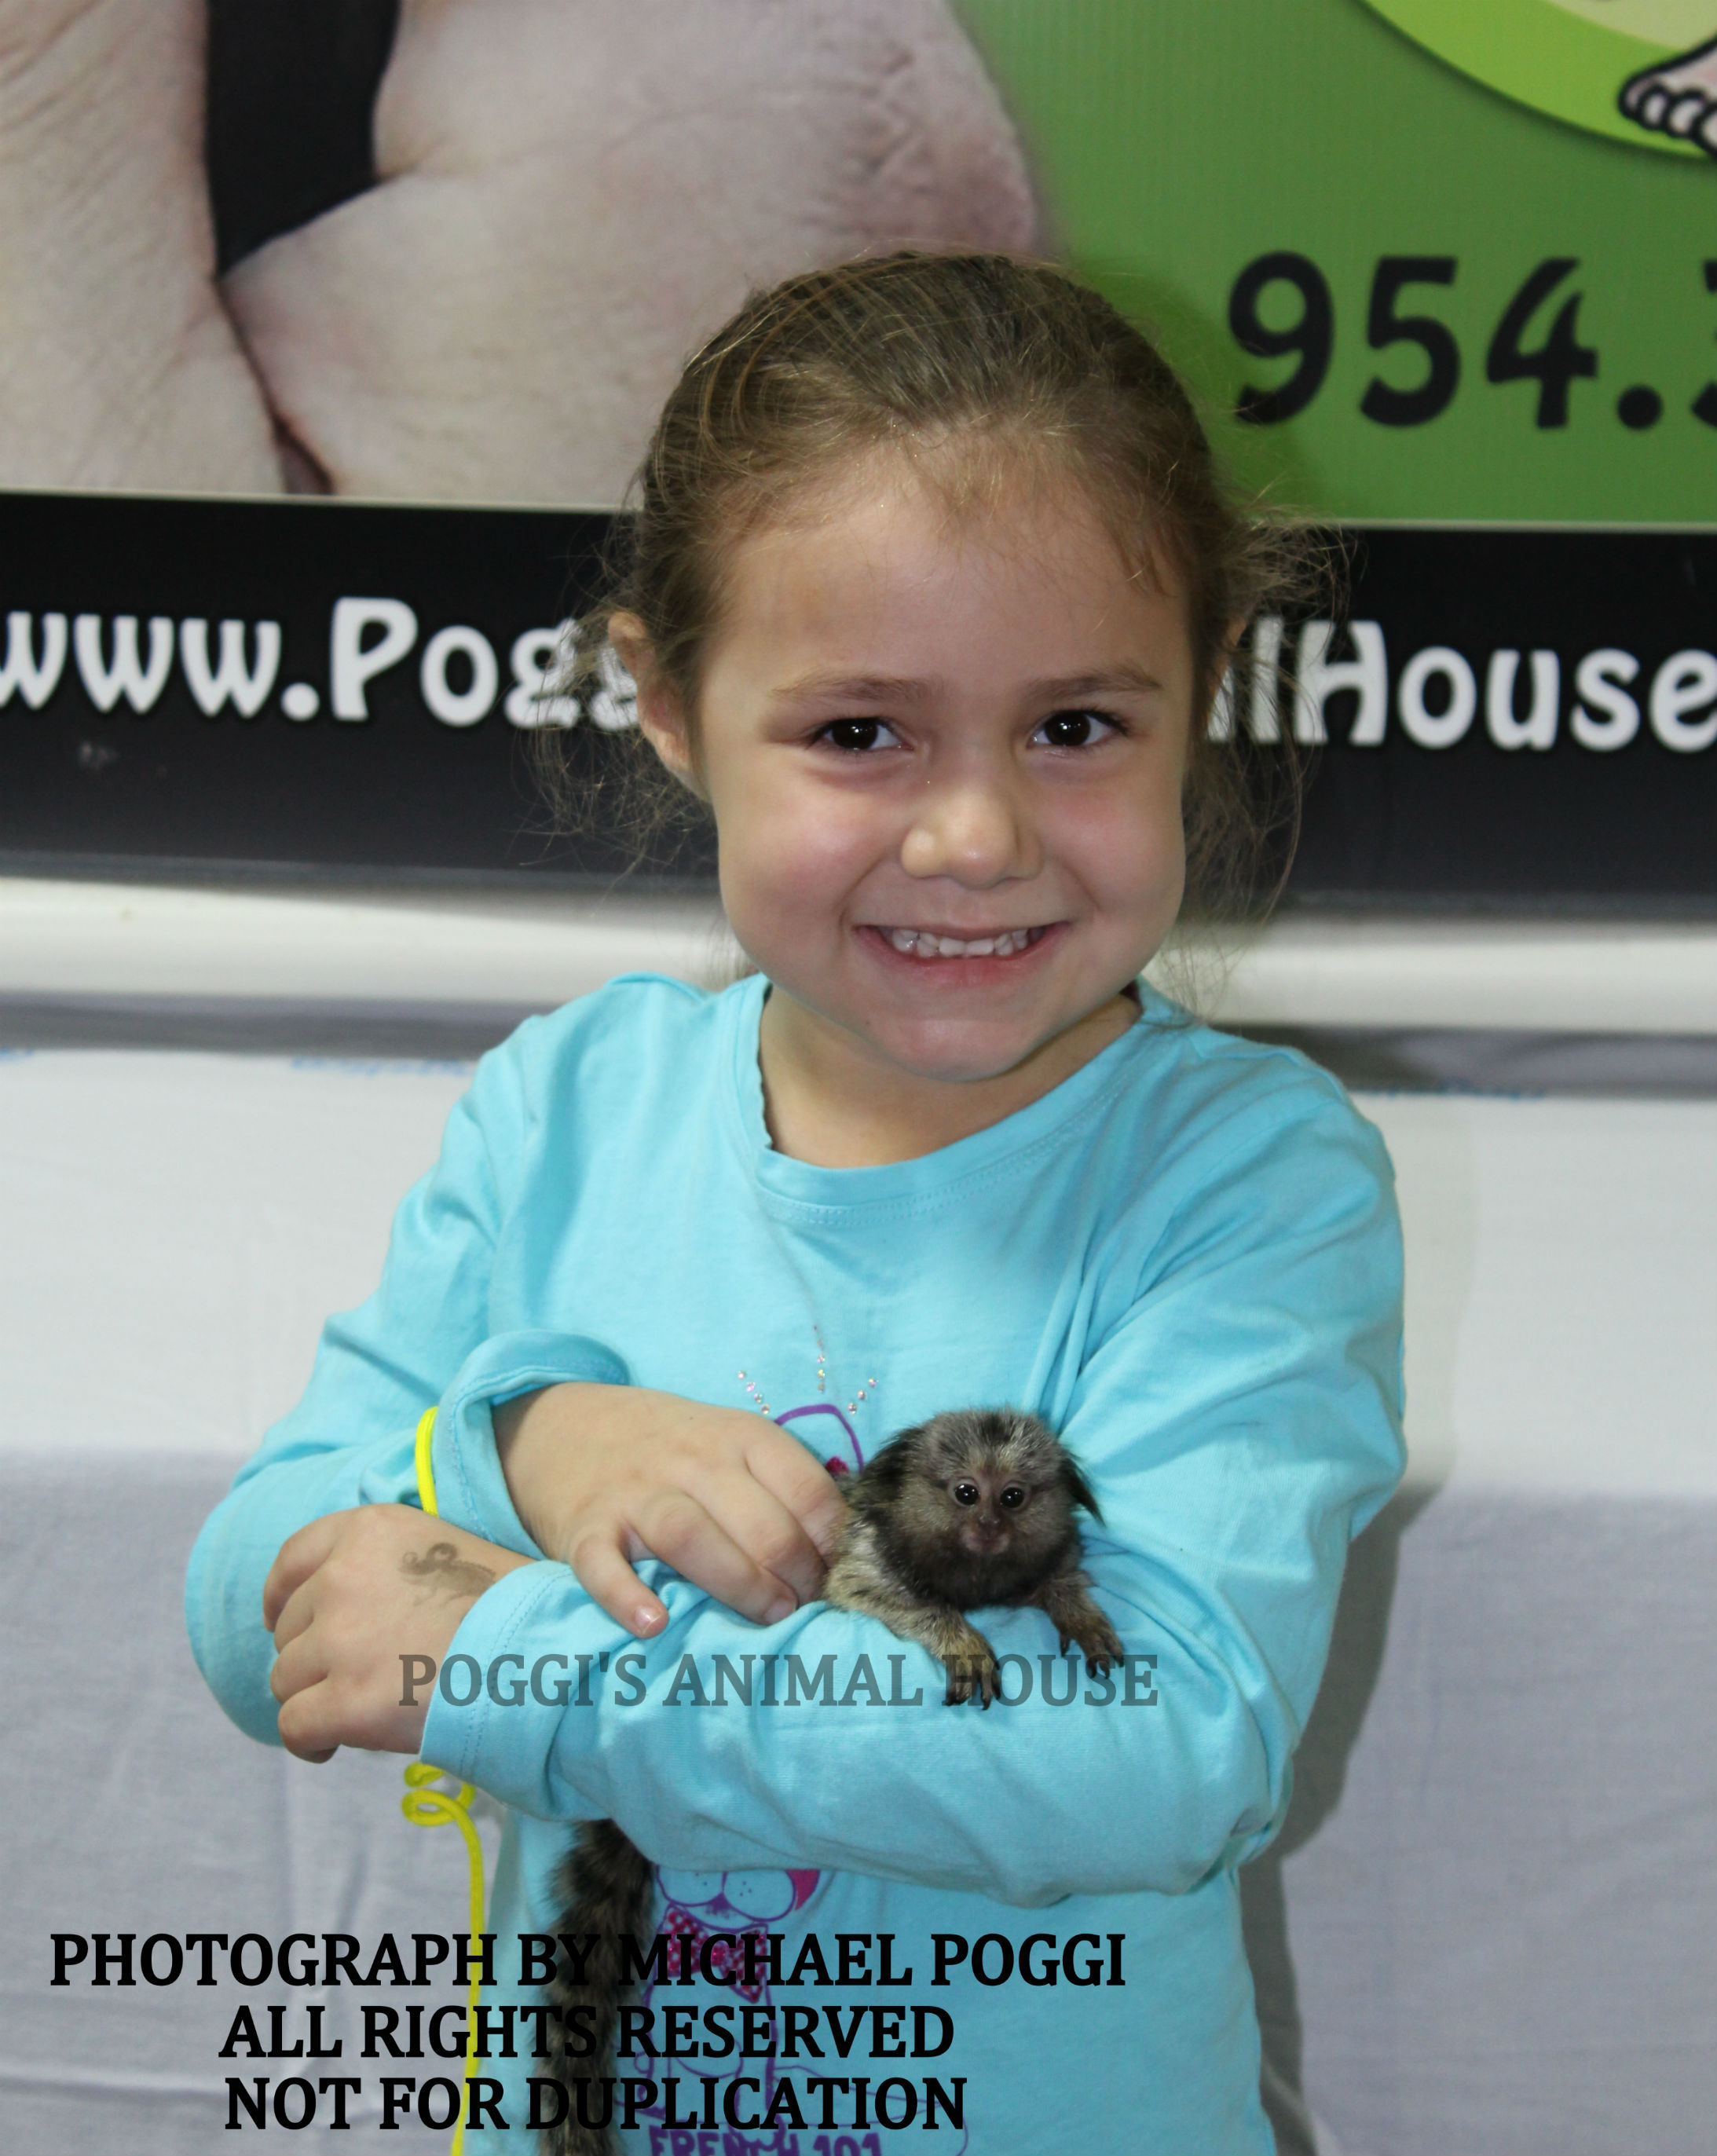 Little girl holding a marmoset - Baby Marmoset For Sale